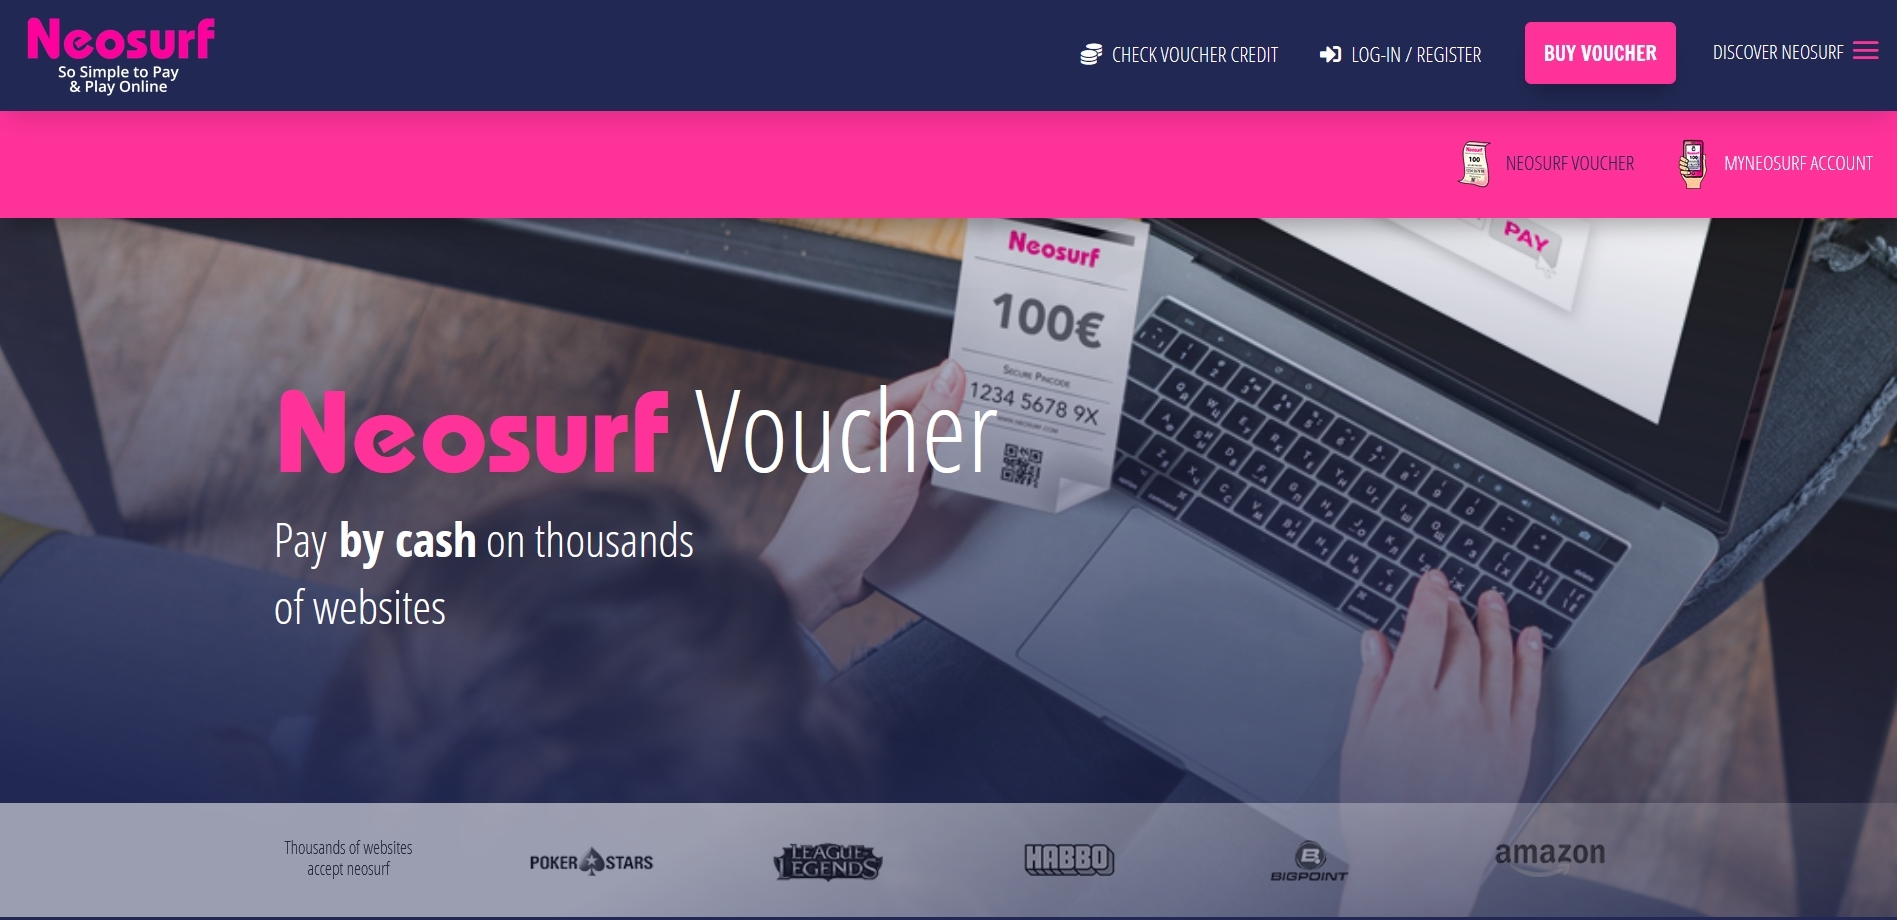 (36.22$) Neosurf €30 Gift Card BE